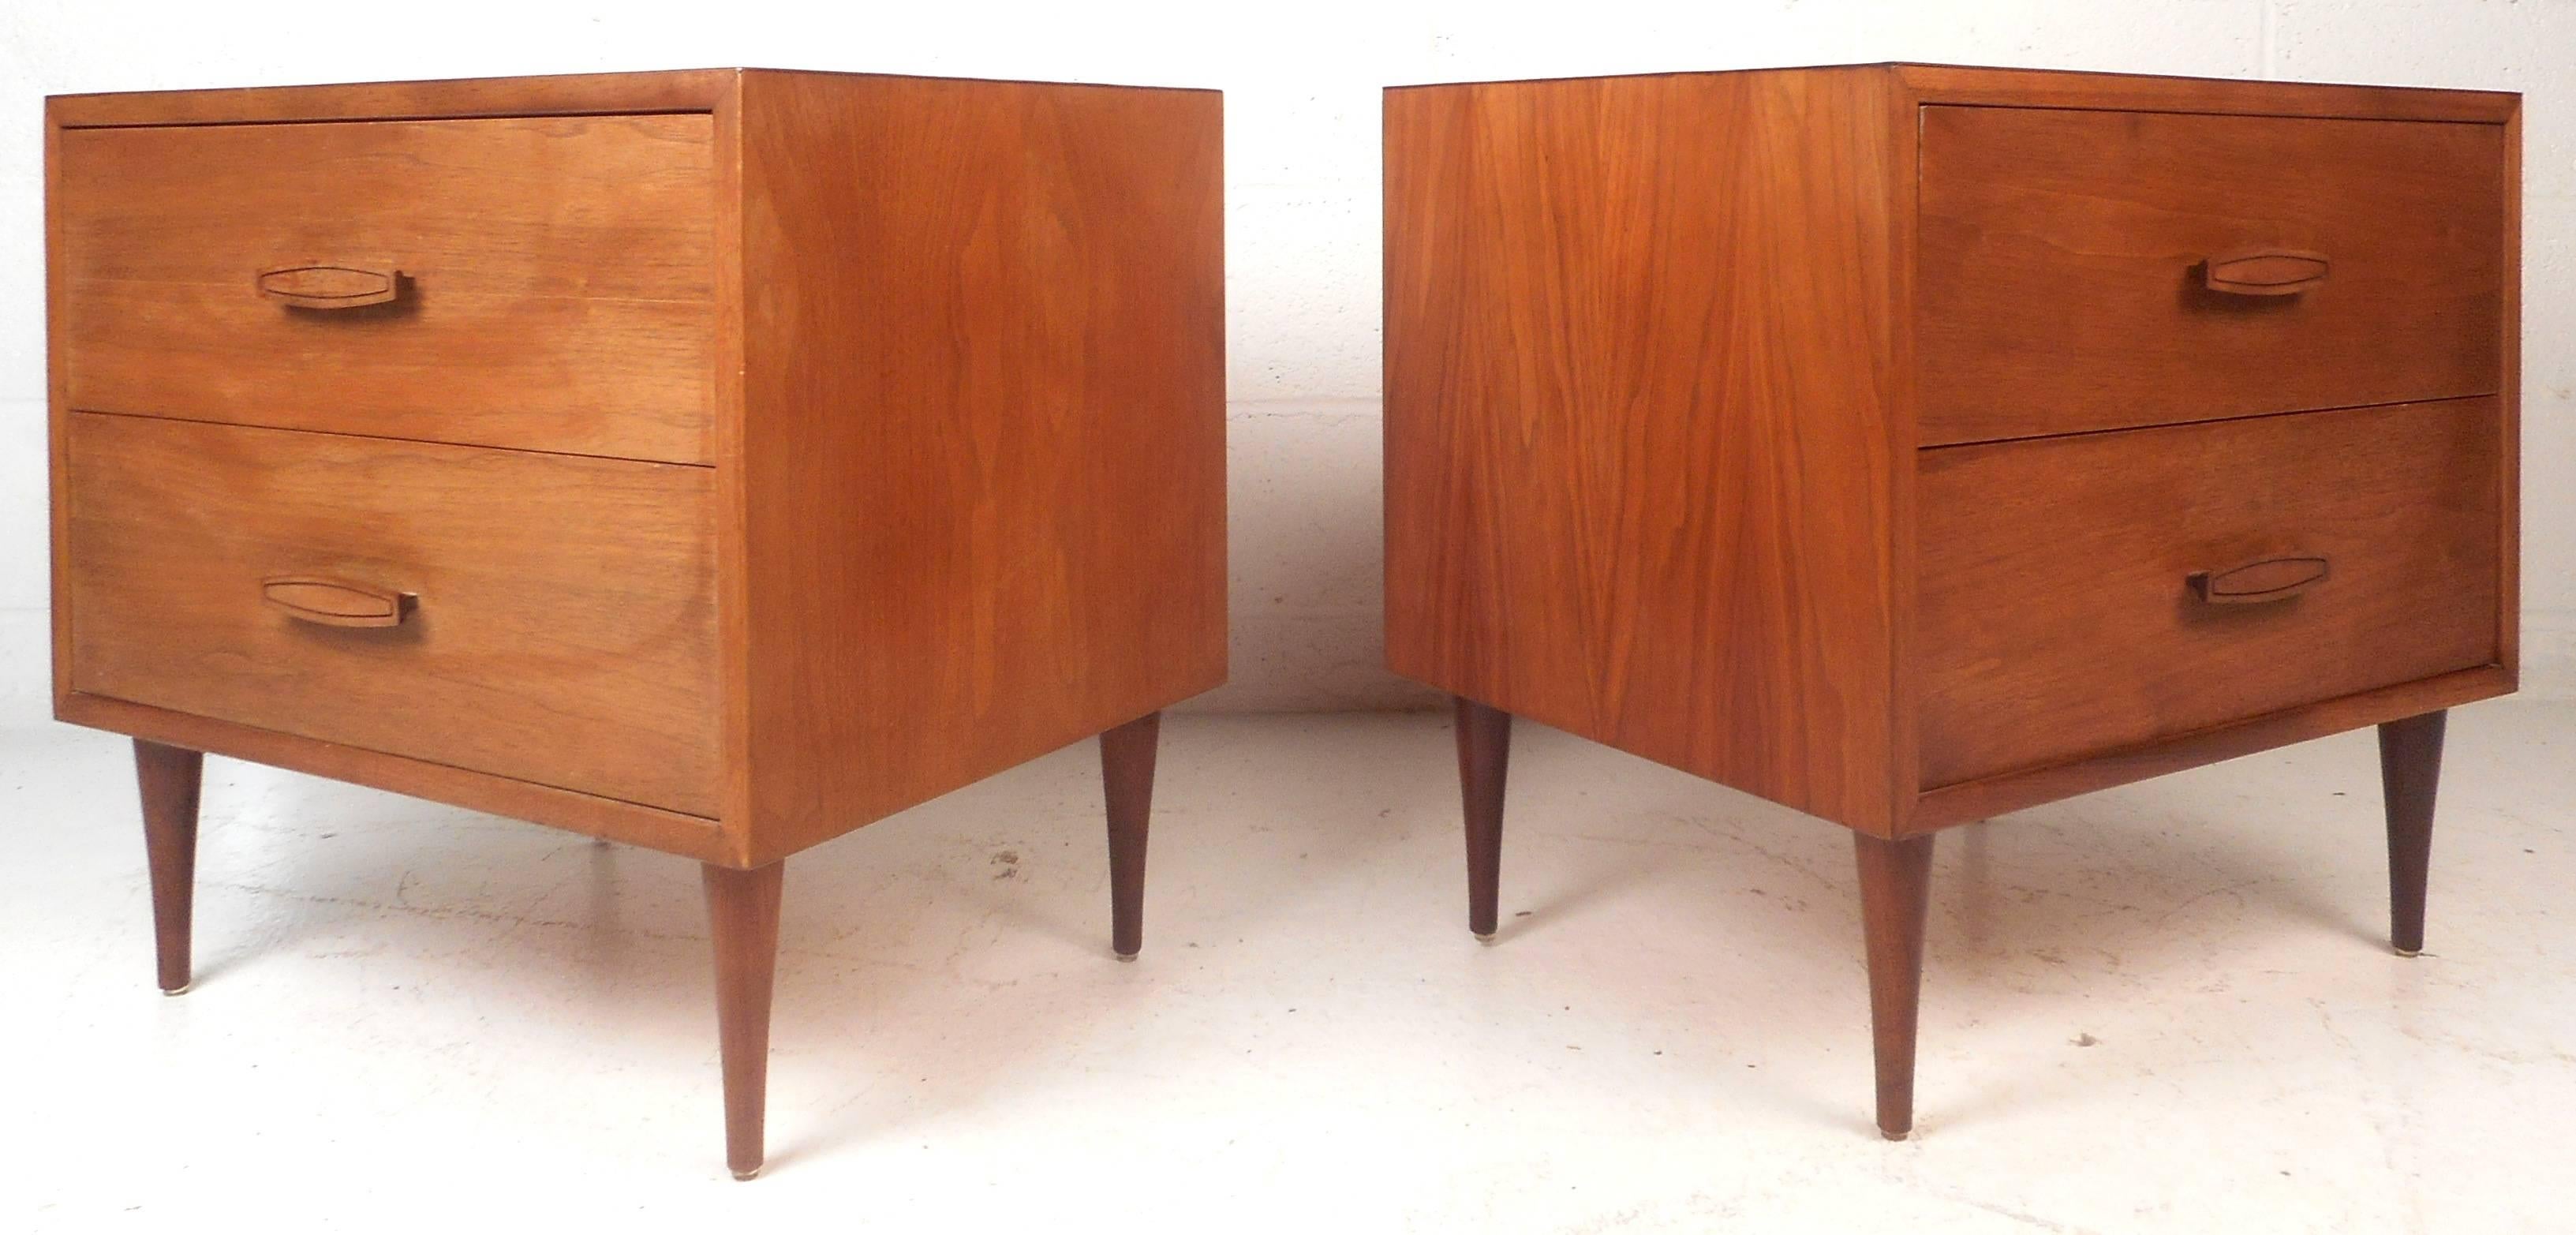 Handsome pair of vintage modern nightstands feature sculpted pulls and tapered legs. Sleek design with two large drawers and beautiful walnut wood grain. This impressive pair offers plenty of storage space without sacrificing style in any modern